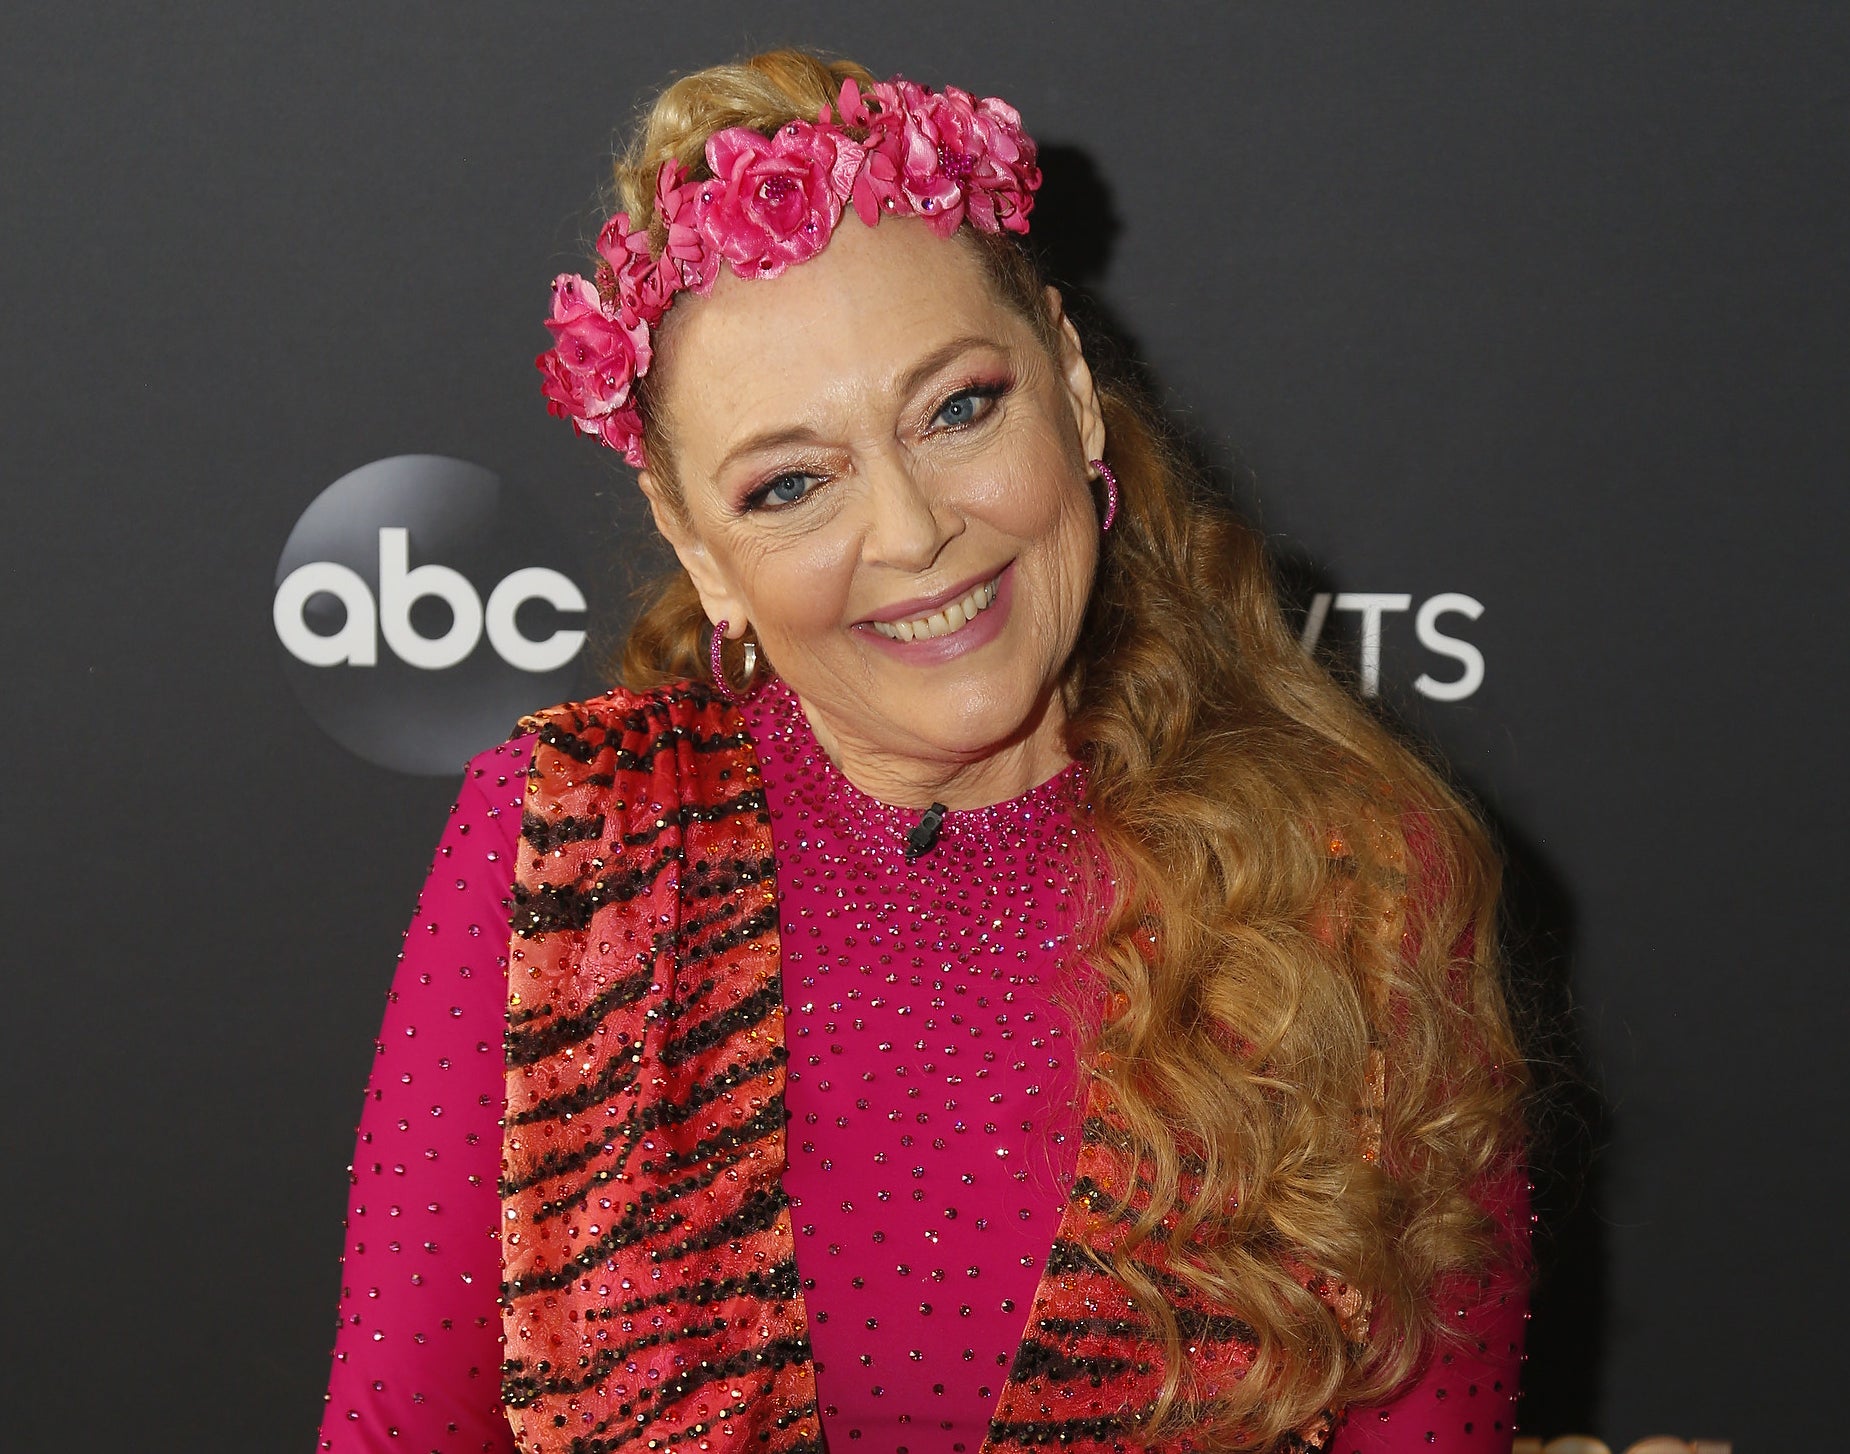 Carole wears a flower crown at an event